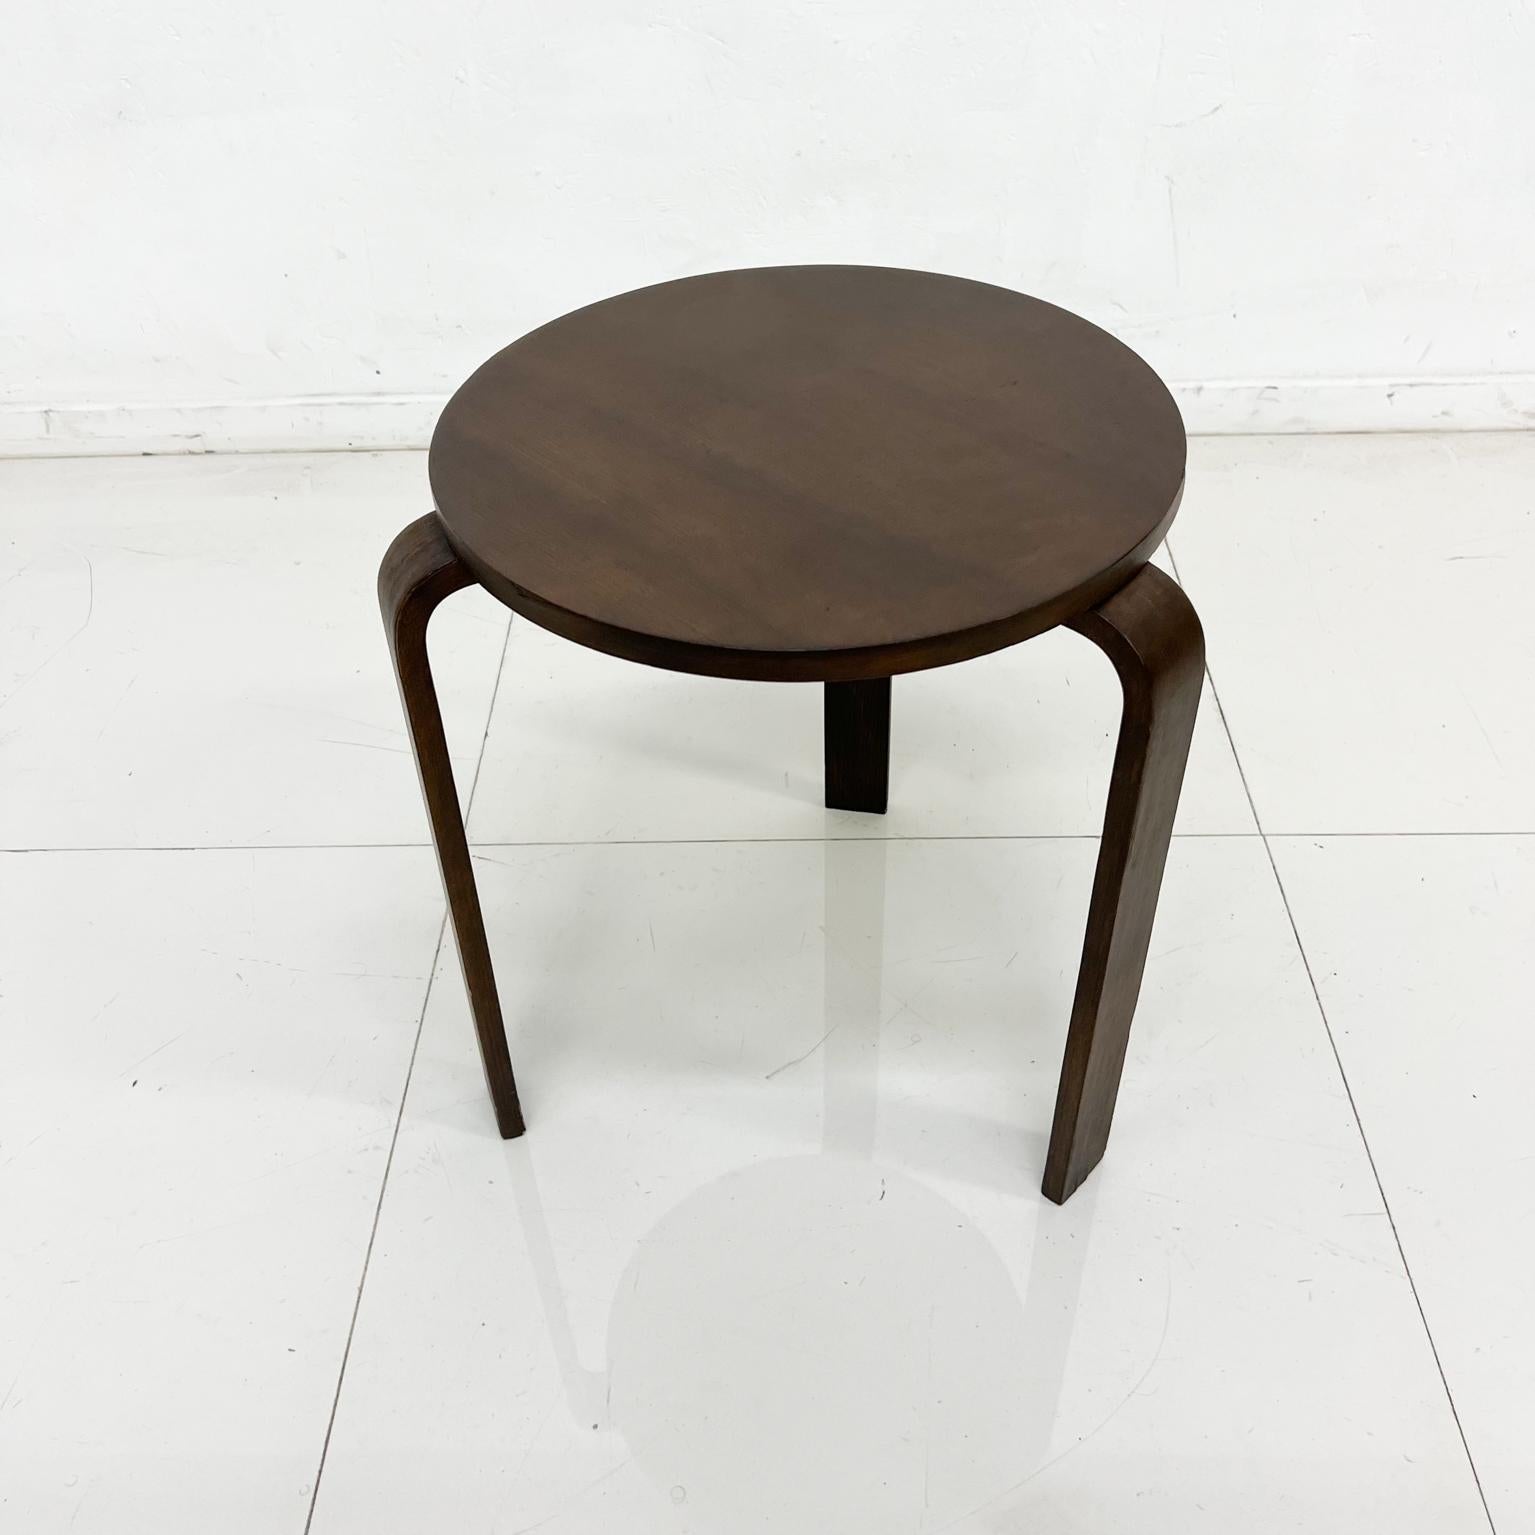 1980s Modern Three Leg Low Stool Iconic Design Style of Alvar Aalto Denmark In Good Condition For Sale In Chula Vista, CA